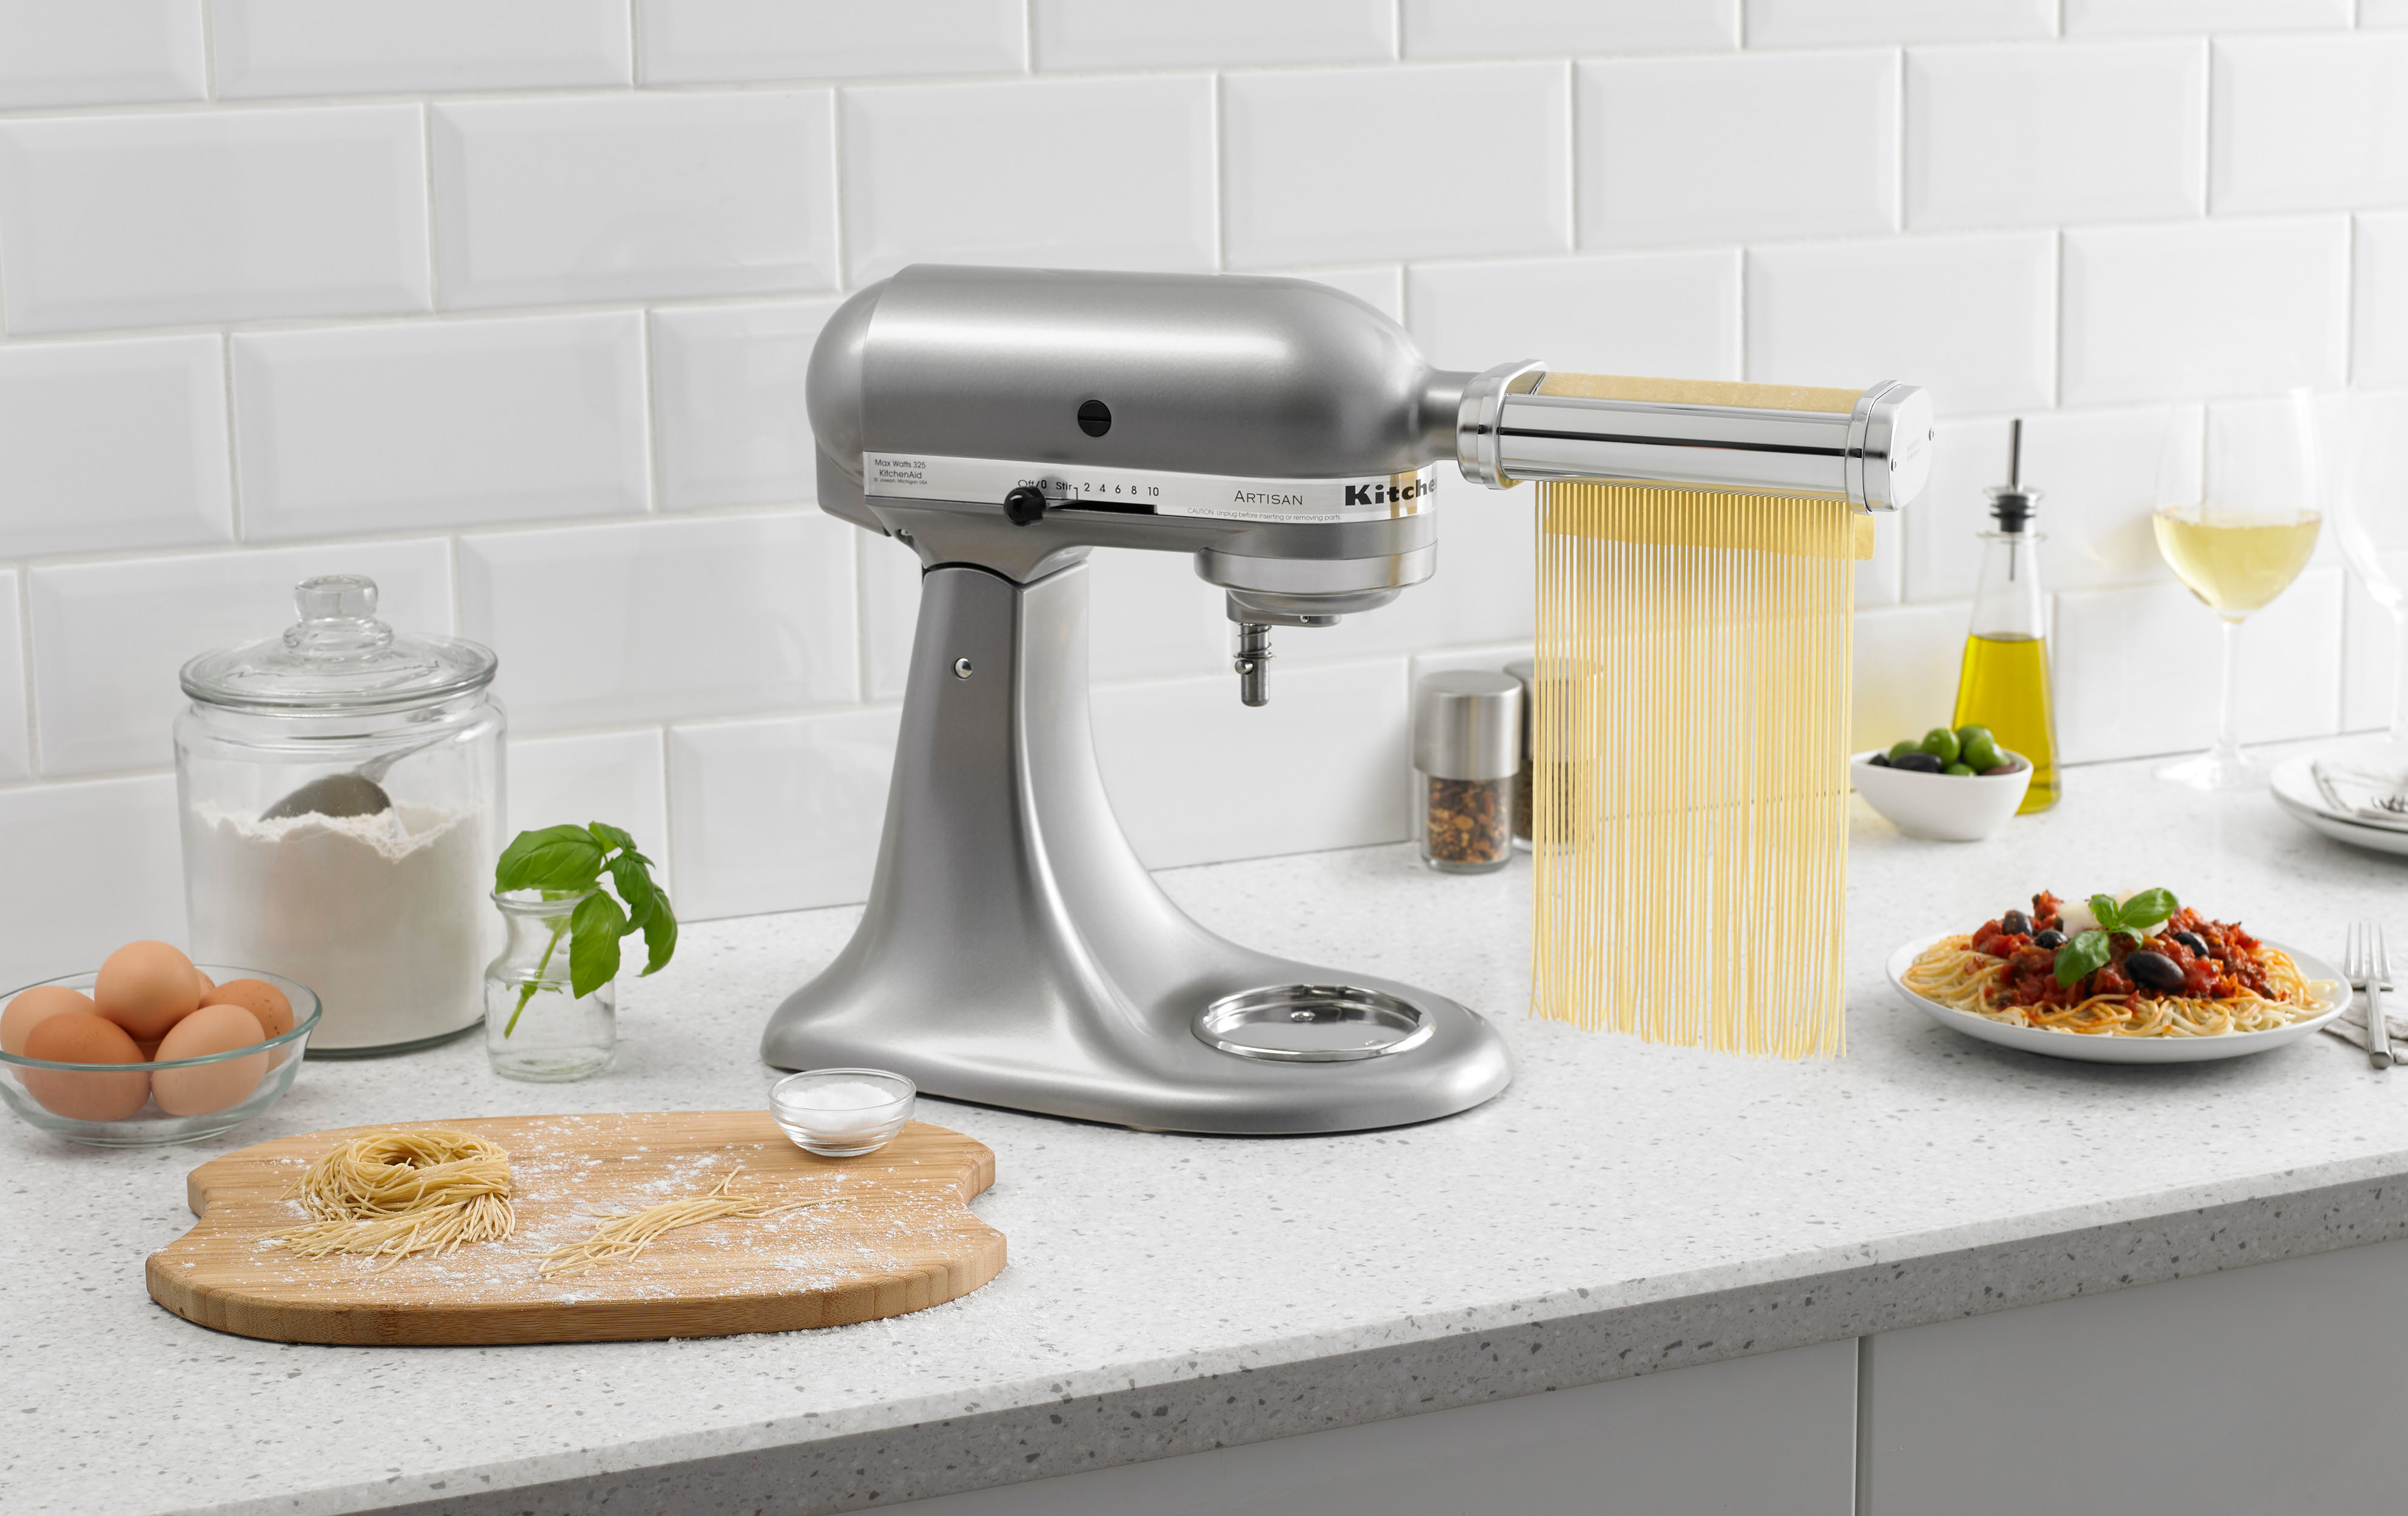 Pasta Roller and Cutter Attachment 